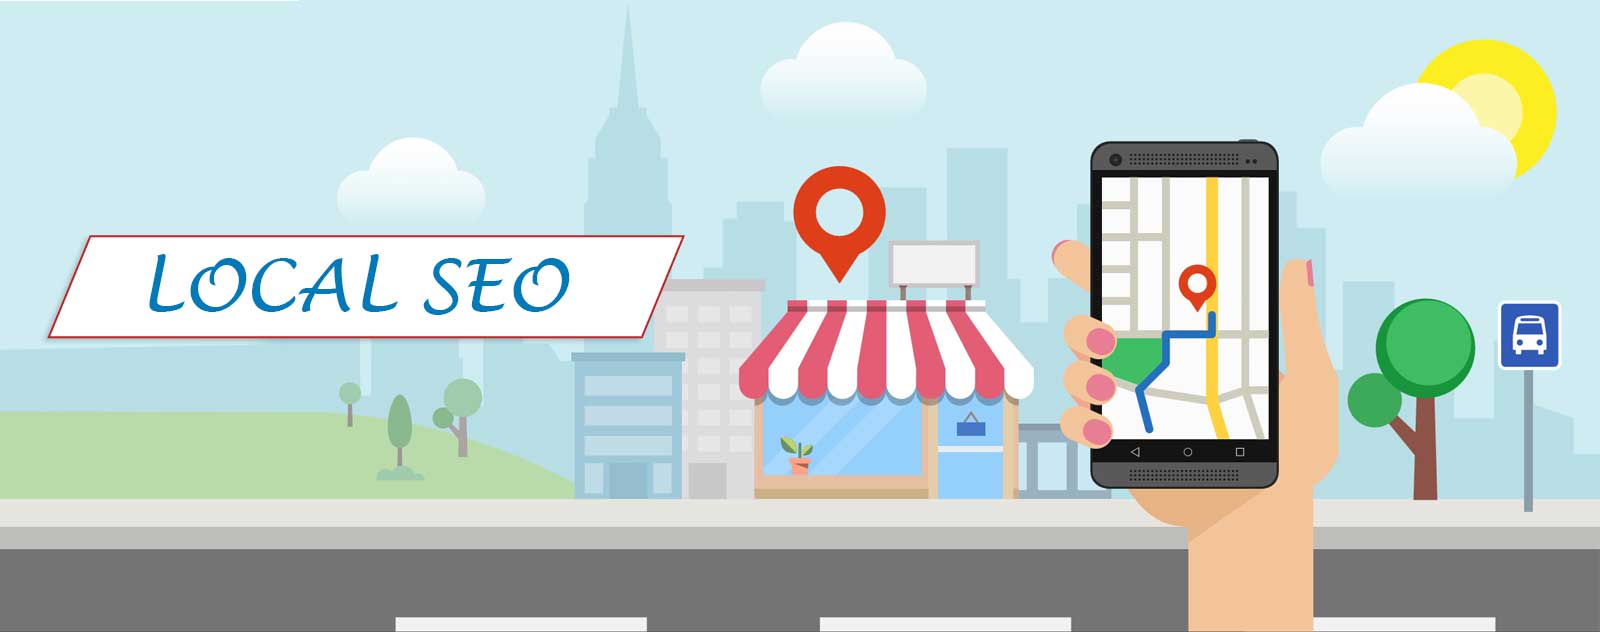 Local Search Engine Optimization, Hire Local SEO Expert Services